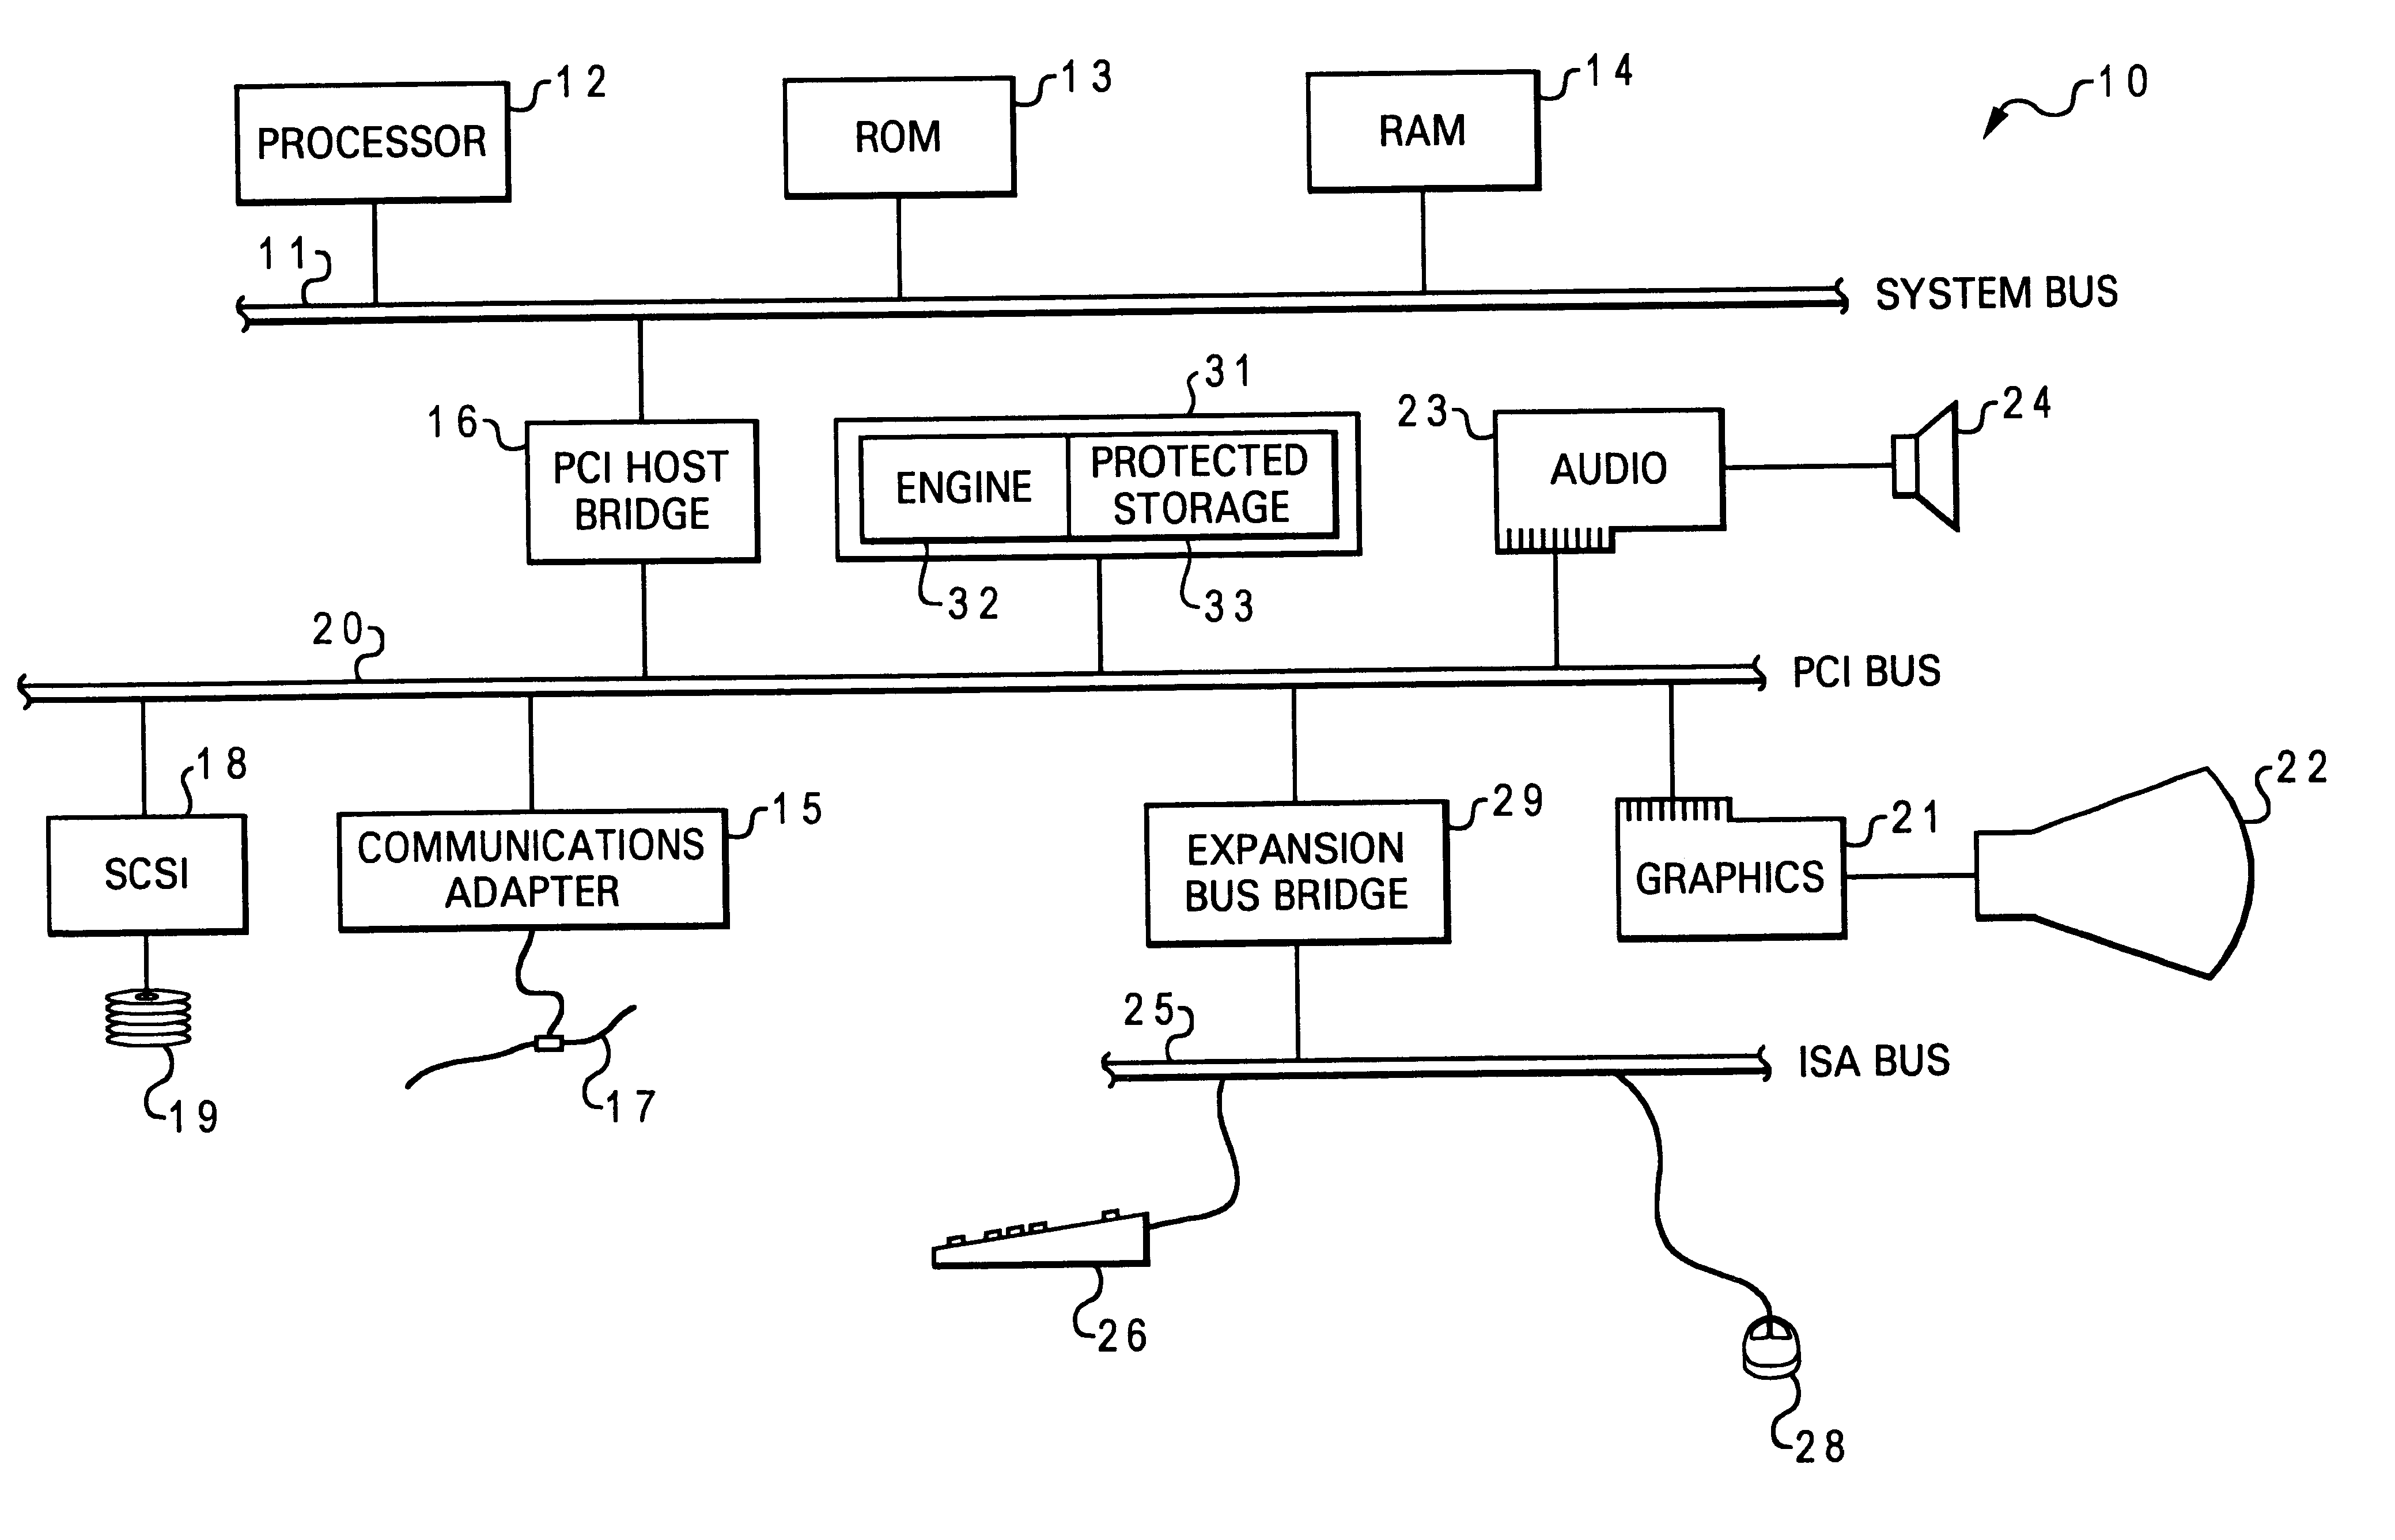 Method for associating a password with a secured public/private key pair